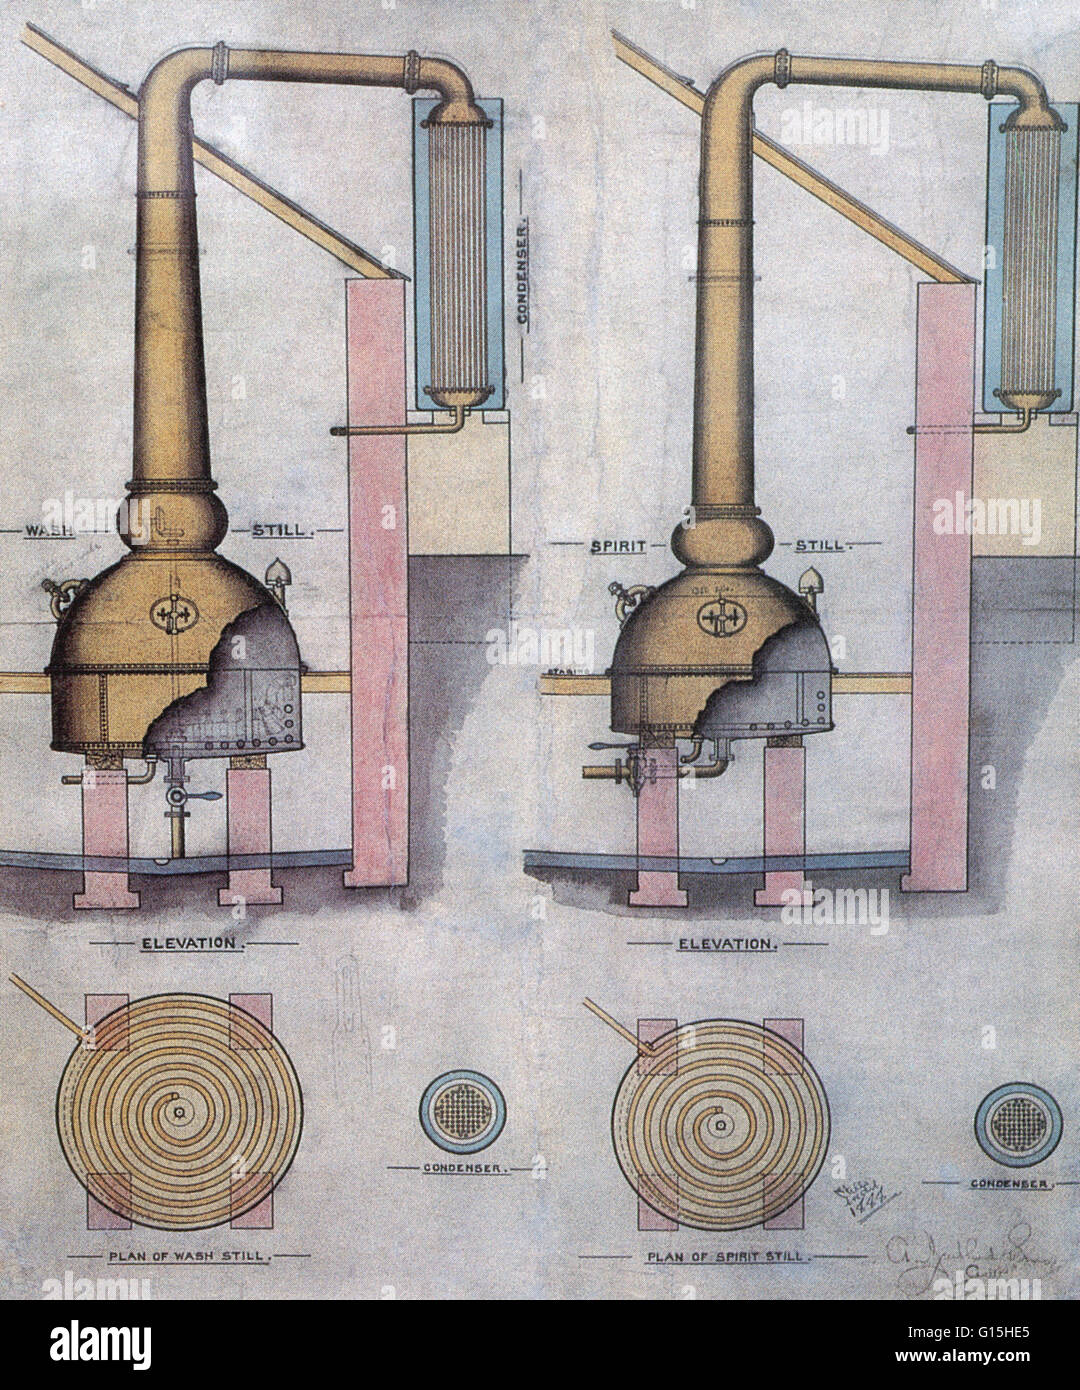 The art and science of whisky making. Distillation. The Classic Pot-still design from the 1800's.This design is still typical in Scotland. Stock Photo